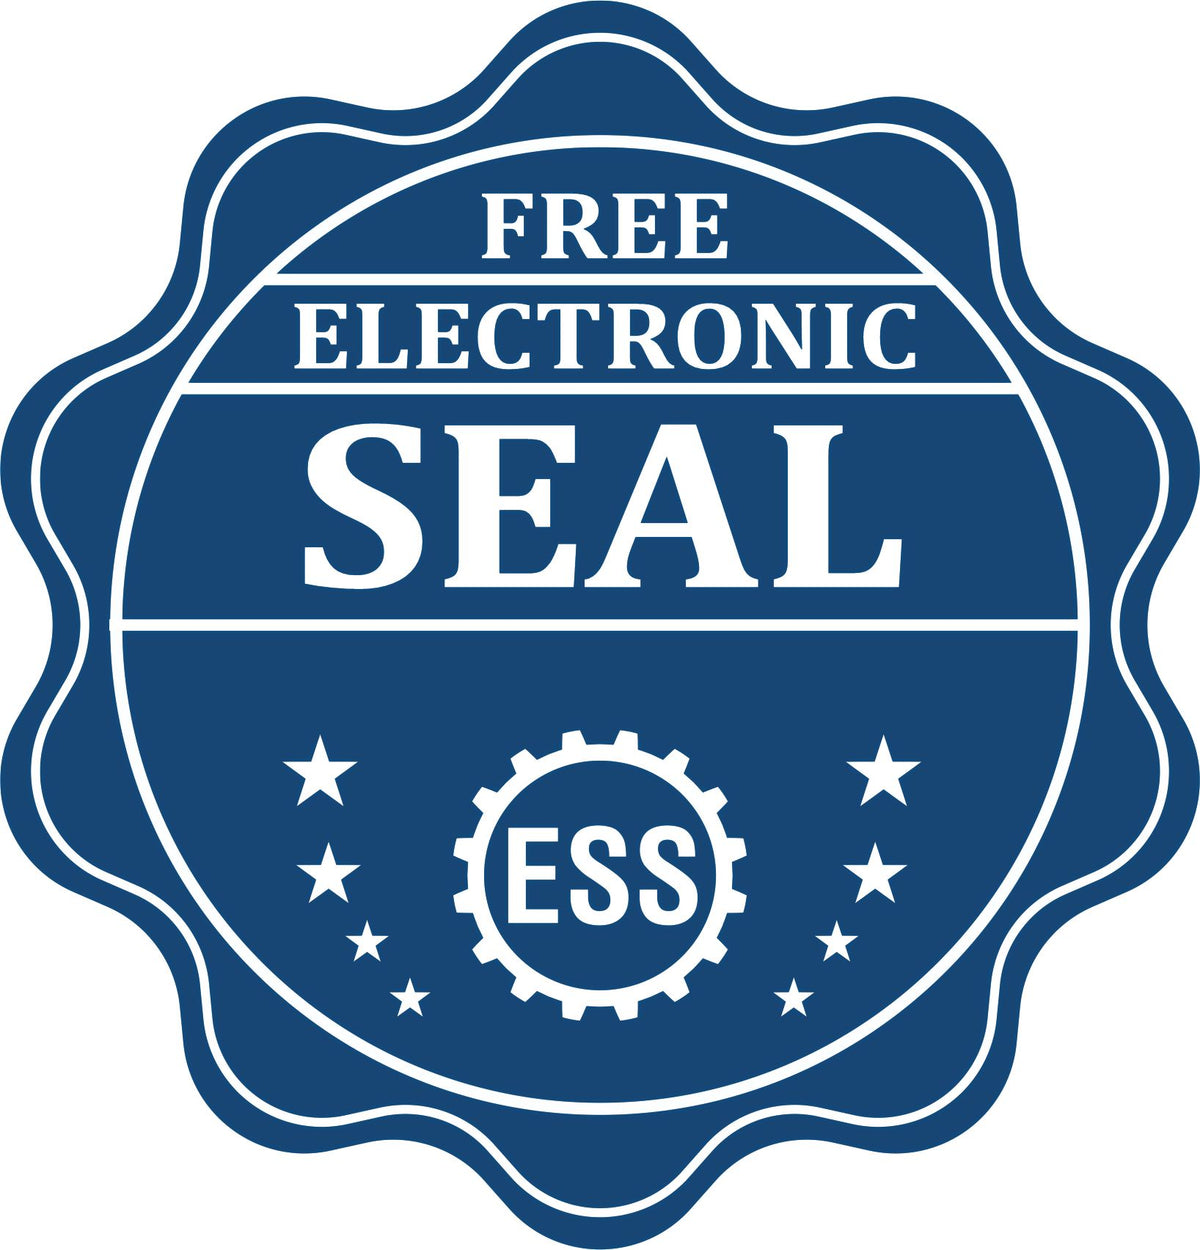 A badge showing a free electronic seal for the Slim Pre-Inked Idaho Land Surveyor Seal Stamp with stars and the ESS gear on the emblem.